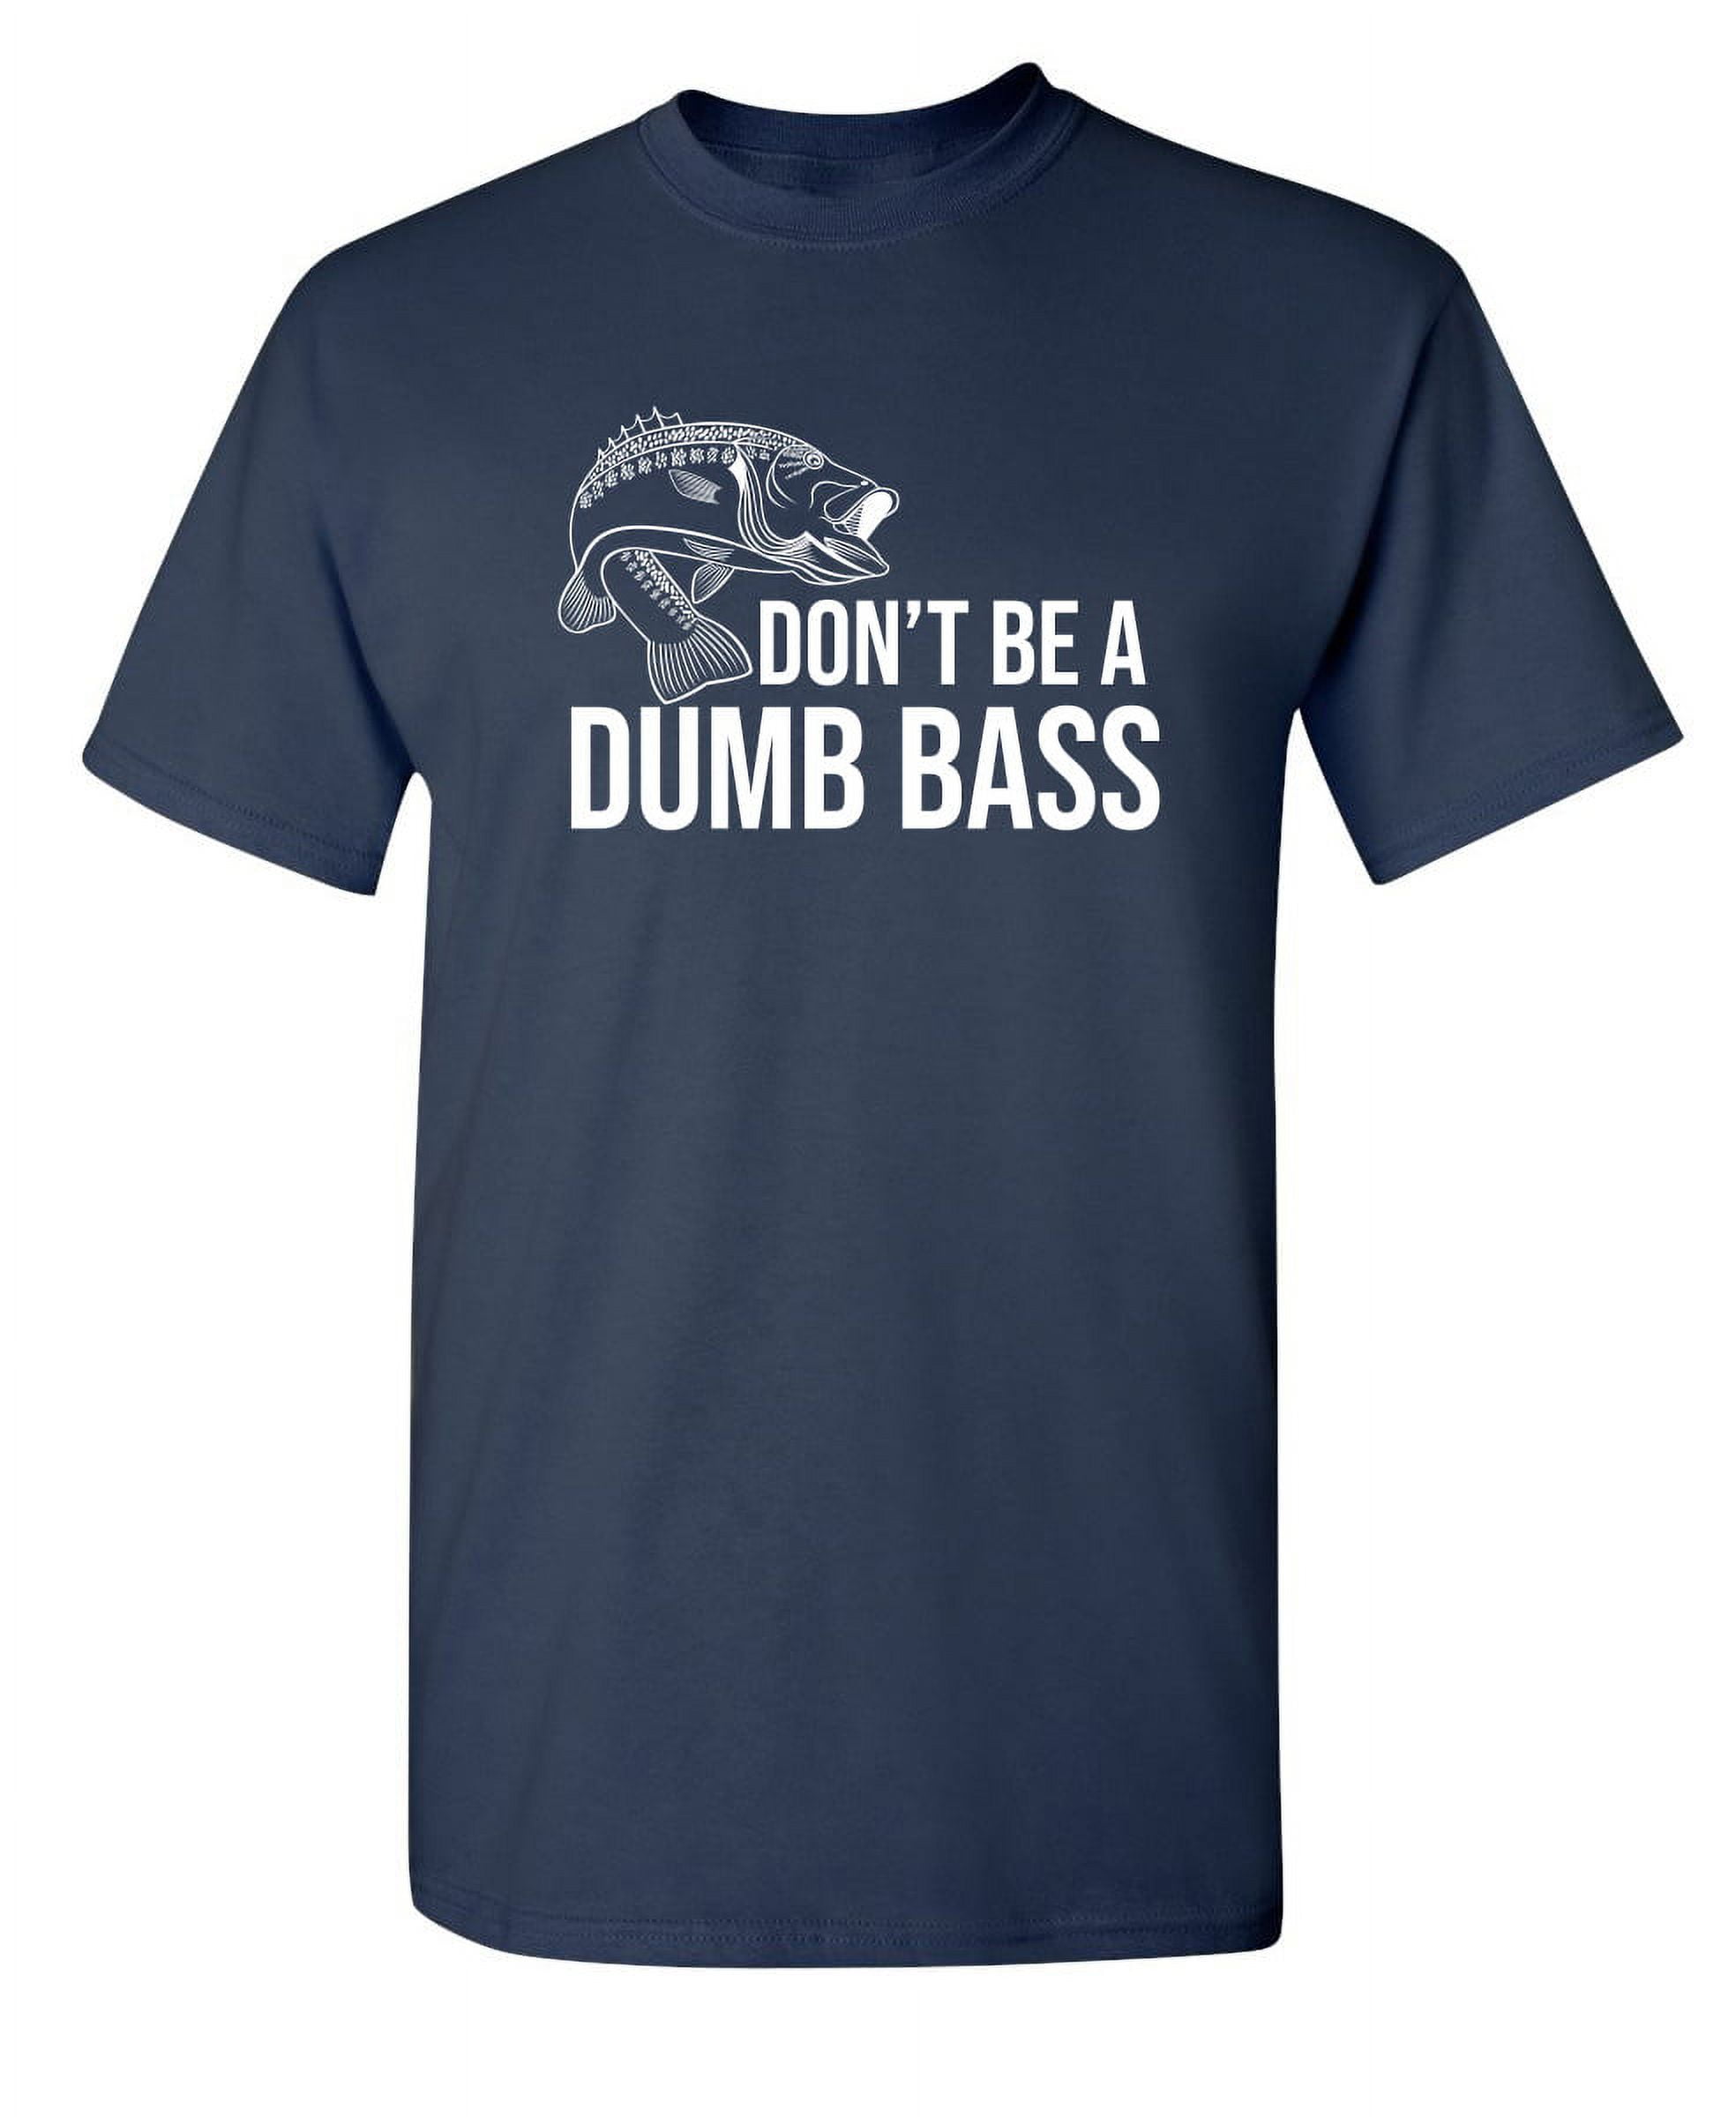 Don't Be A Dumb Bass Sarcastic Humor Graphic Novelty Funny Tall T Shirt 